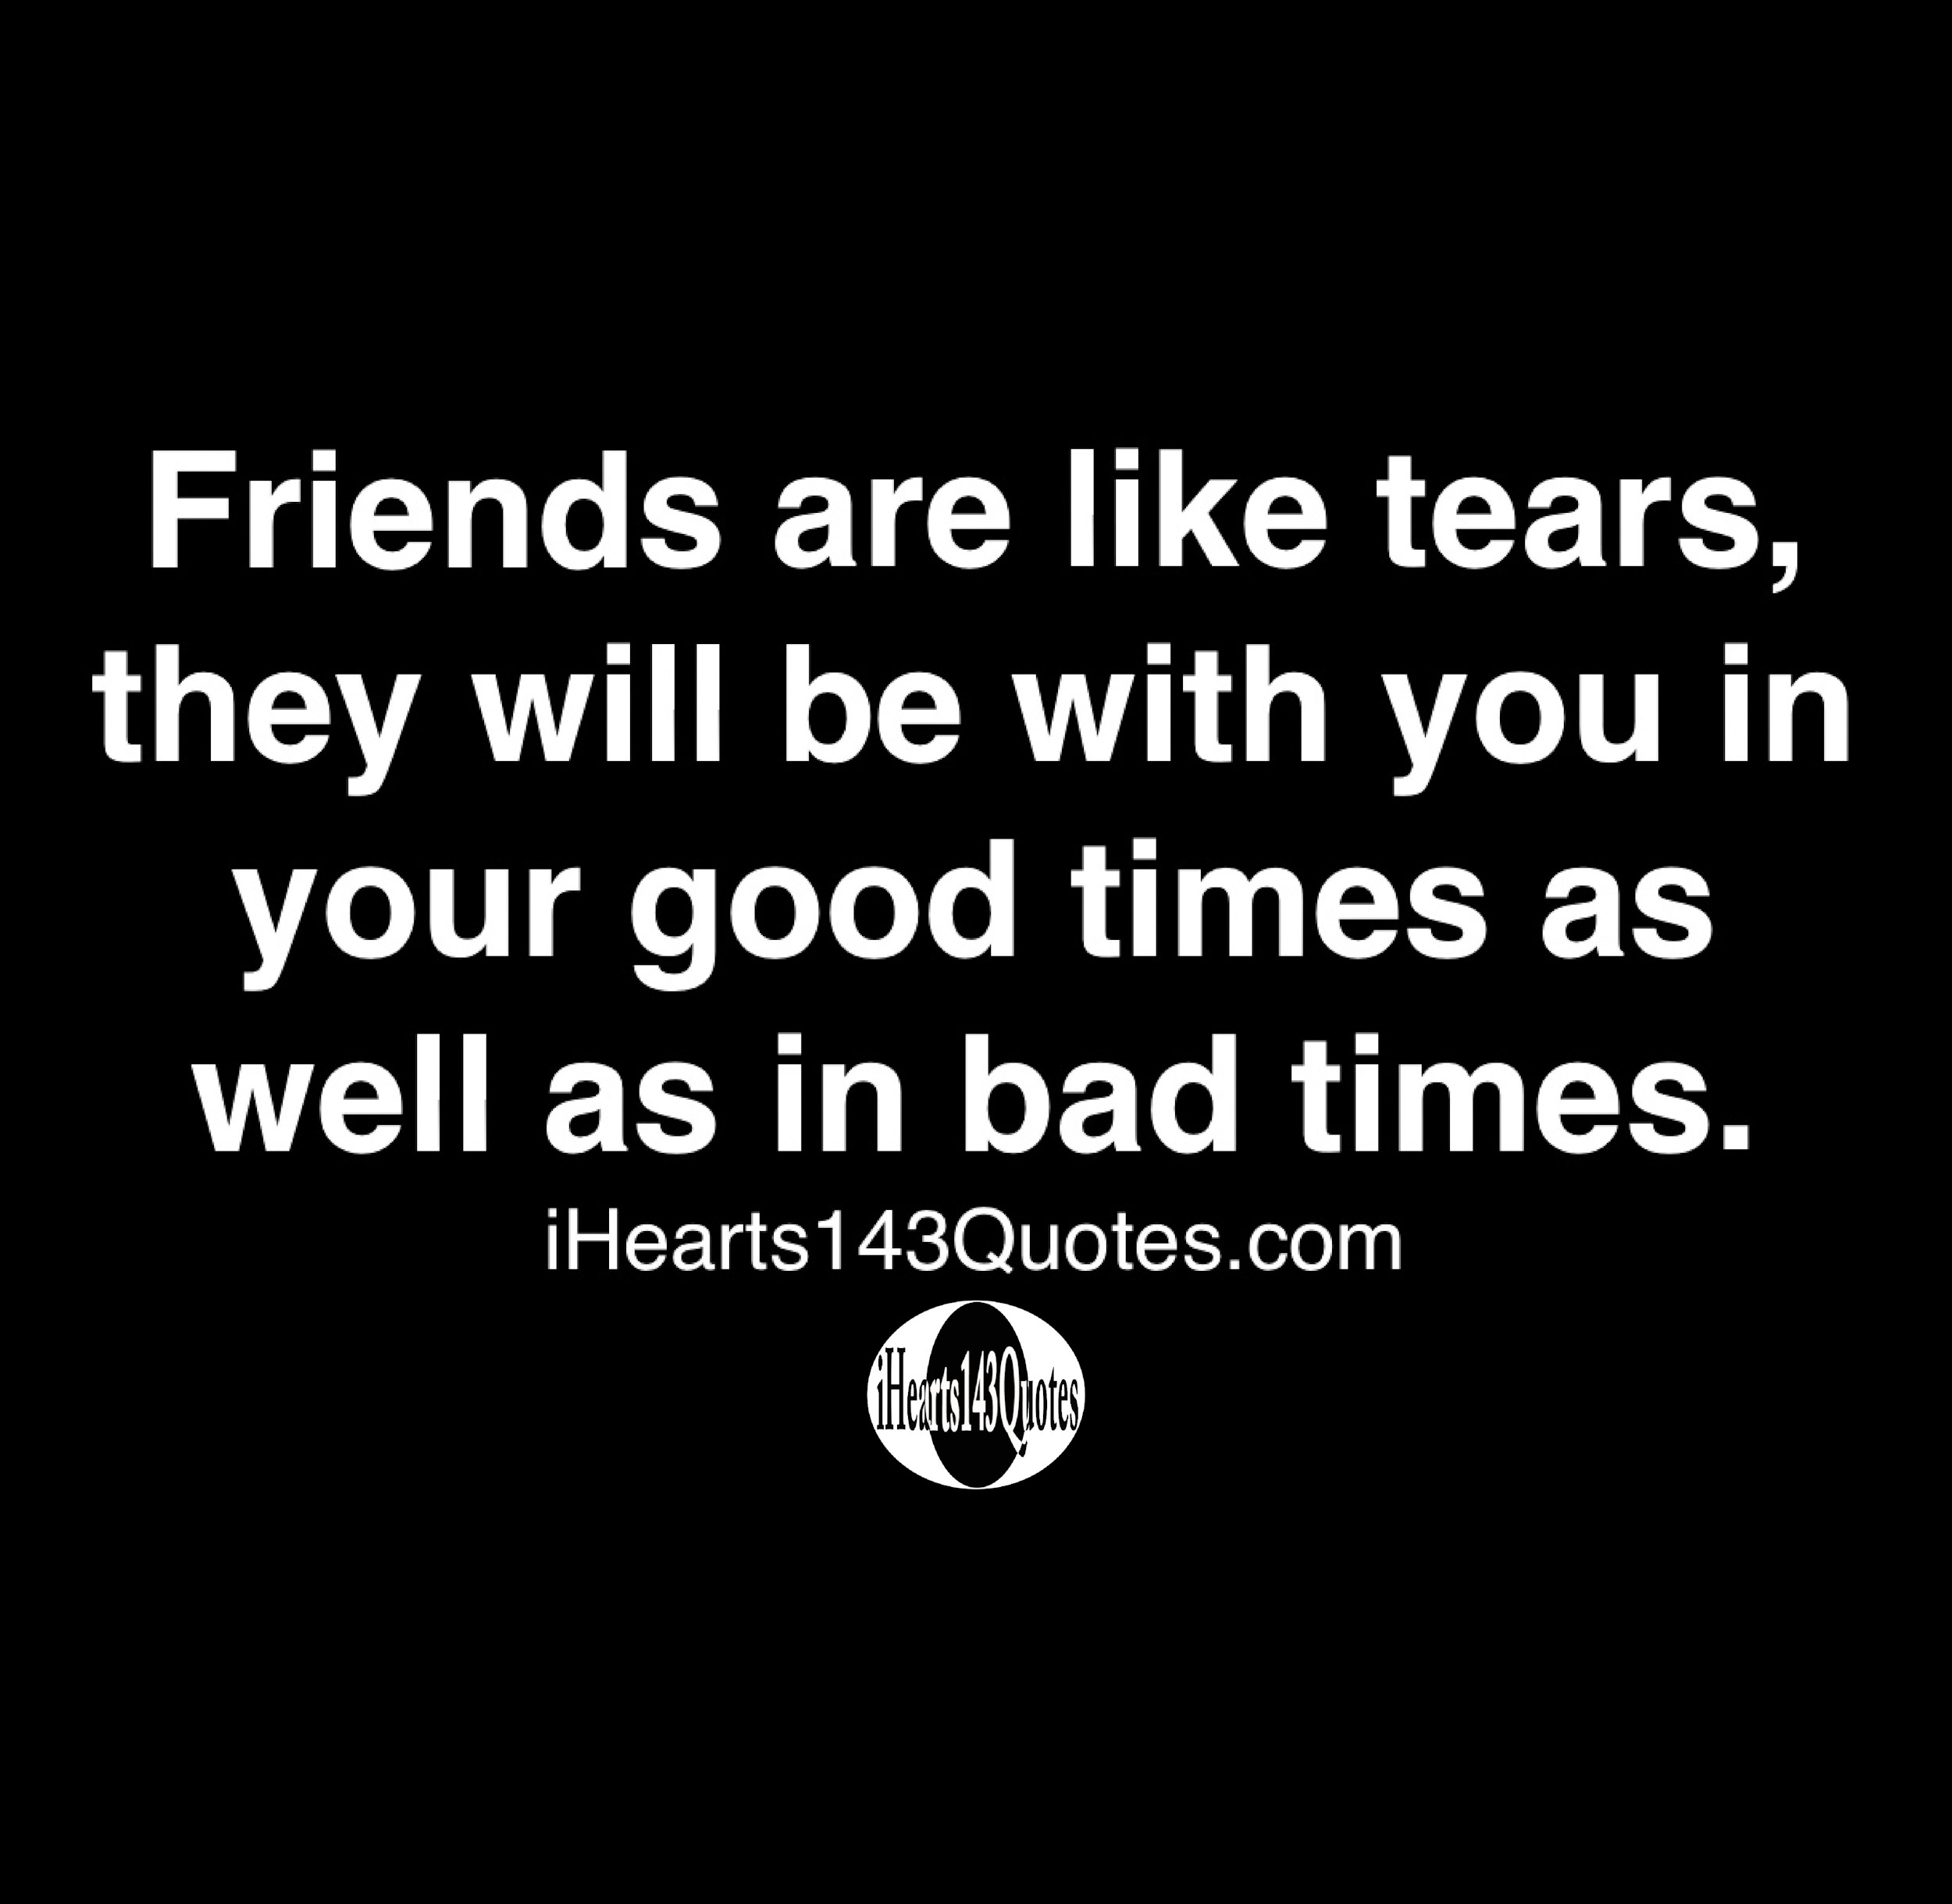 Friends Are Like Tears, They Will Be With You In Your Good Times As Well As In Bad Times - Quotes - Ihearts143Quotes